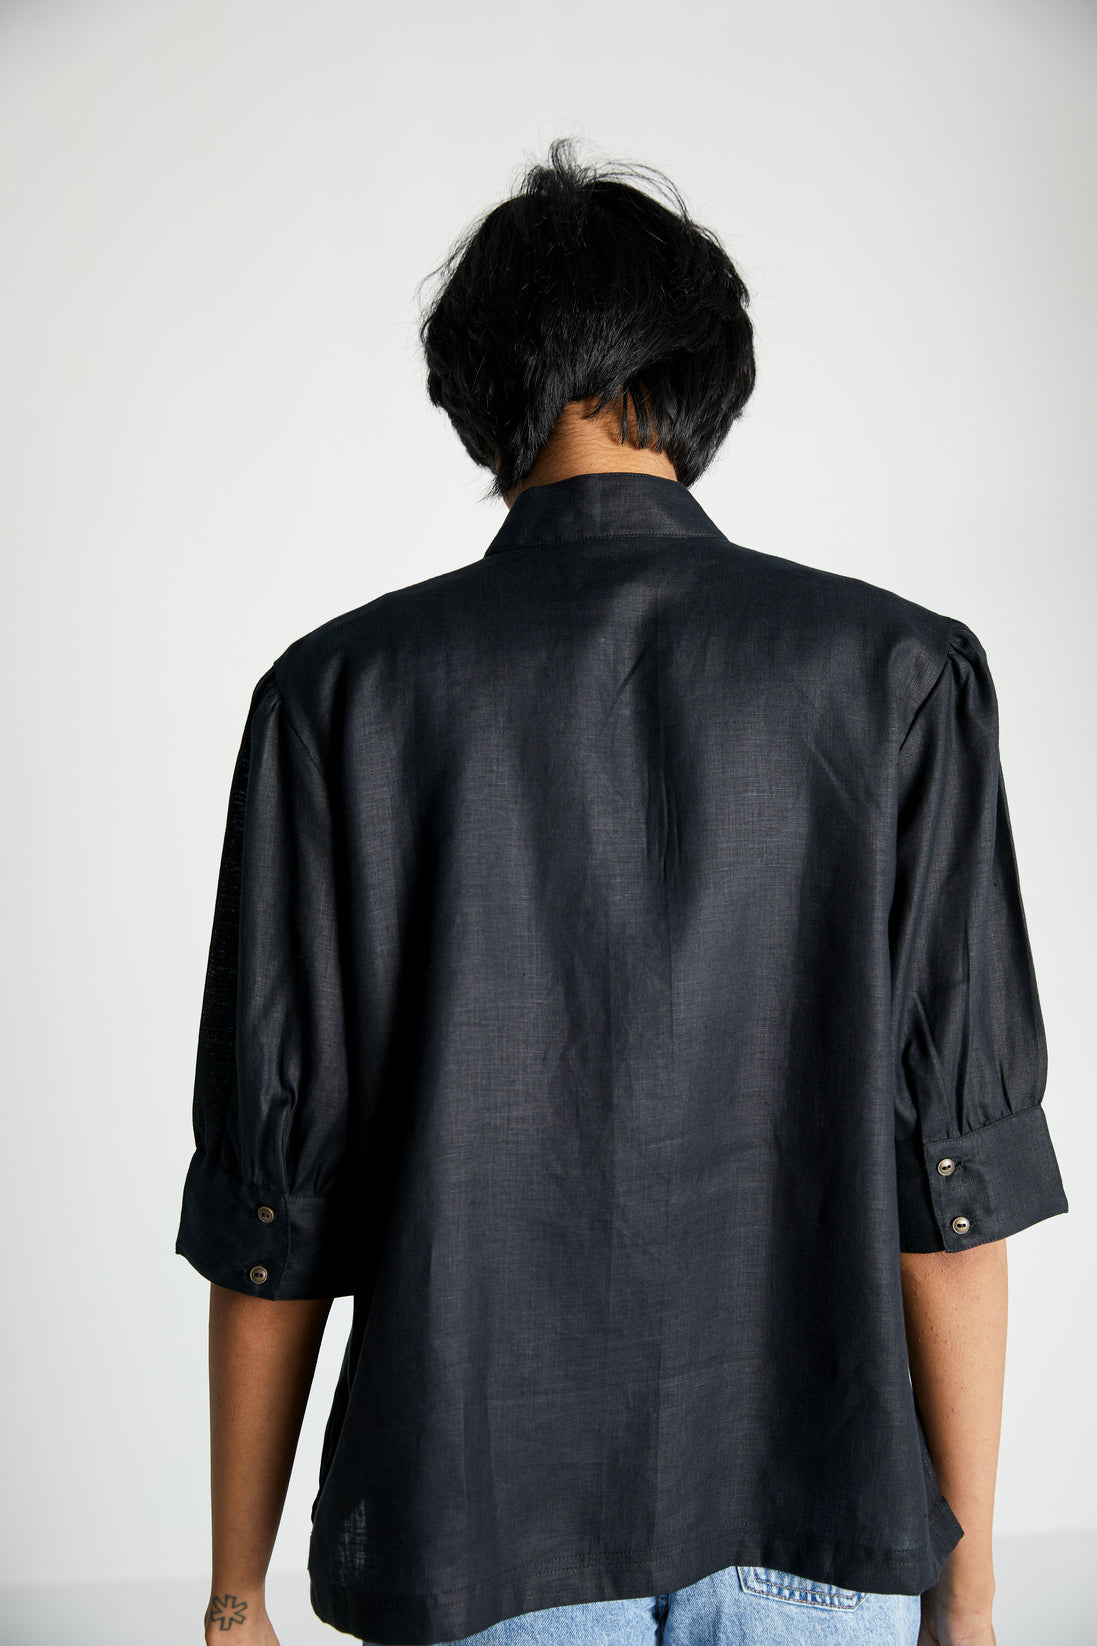 Midnight Secrets Jacket at Kamakhyaa by Reistor. This item is Black, Casual Wear, Hemp, Natural, Noir, Relaxed Fit, Shirts, Solids, Womenswear